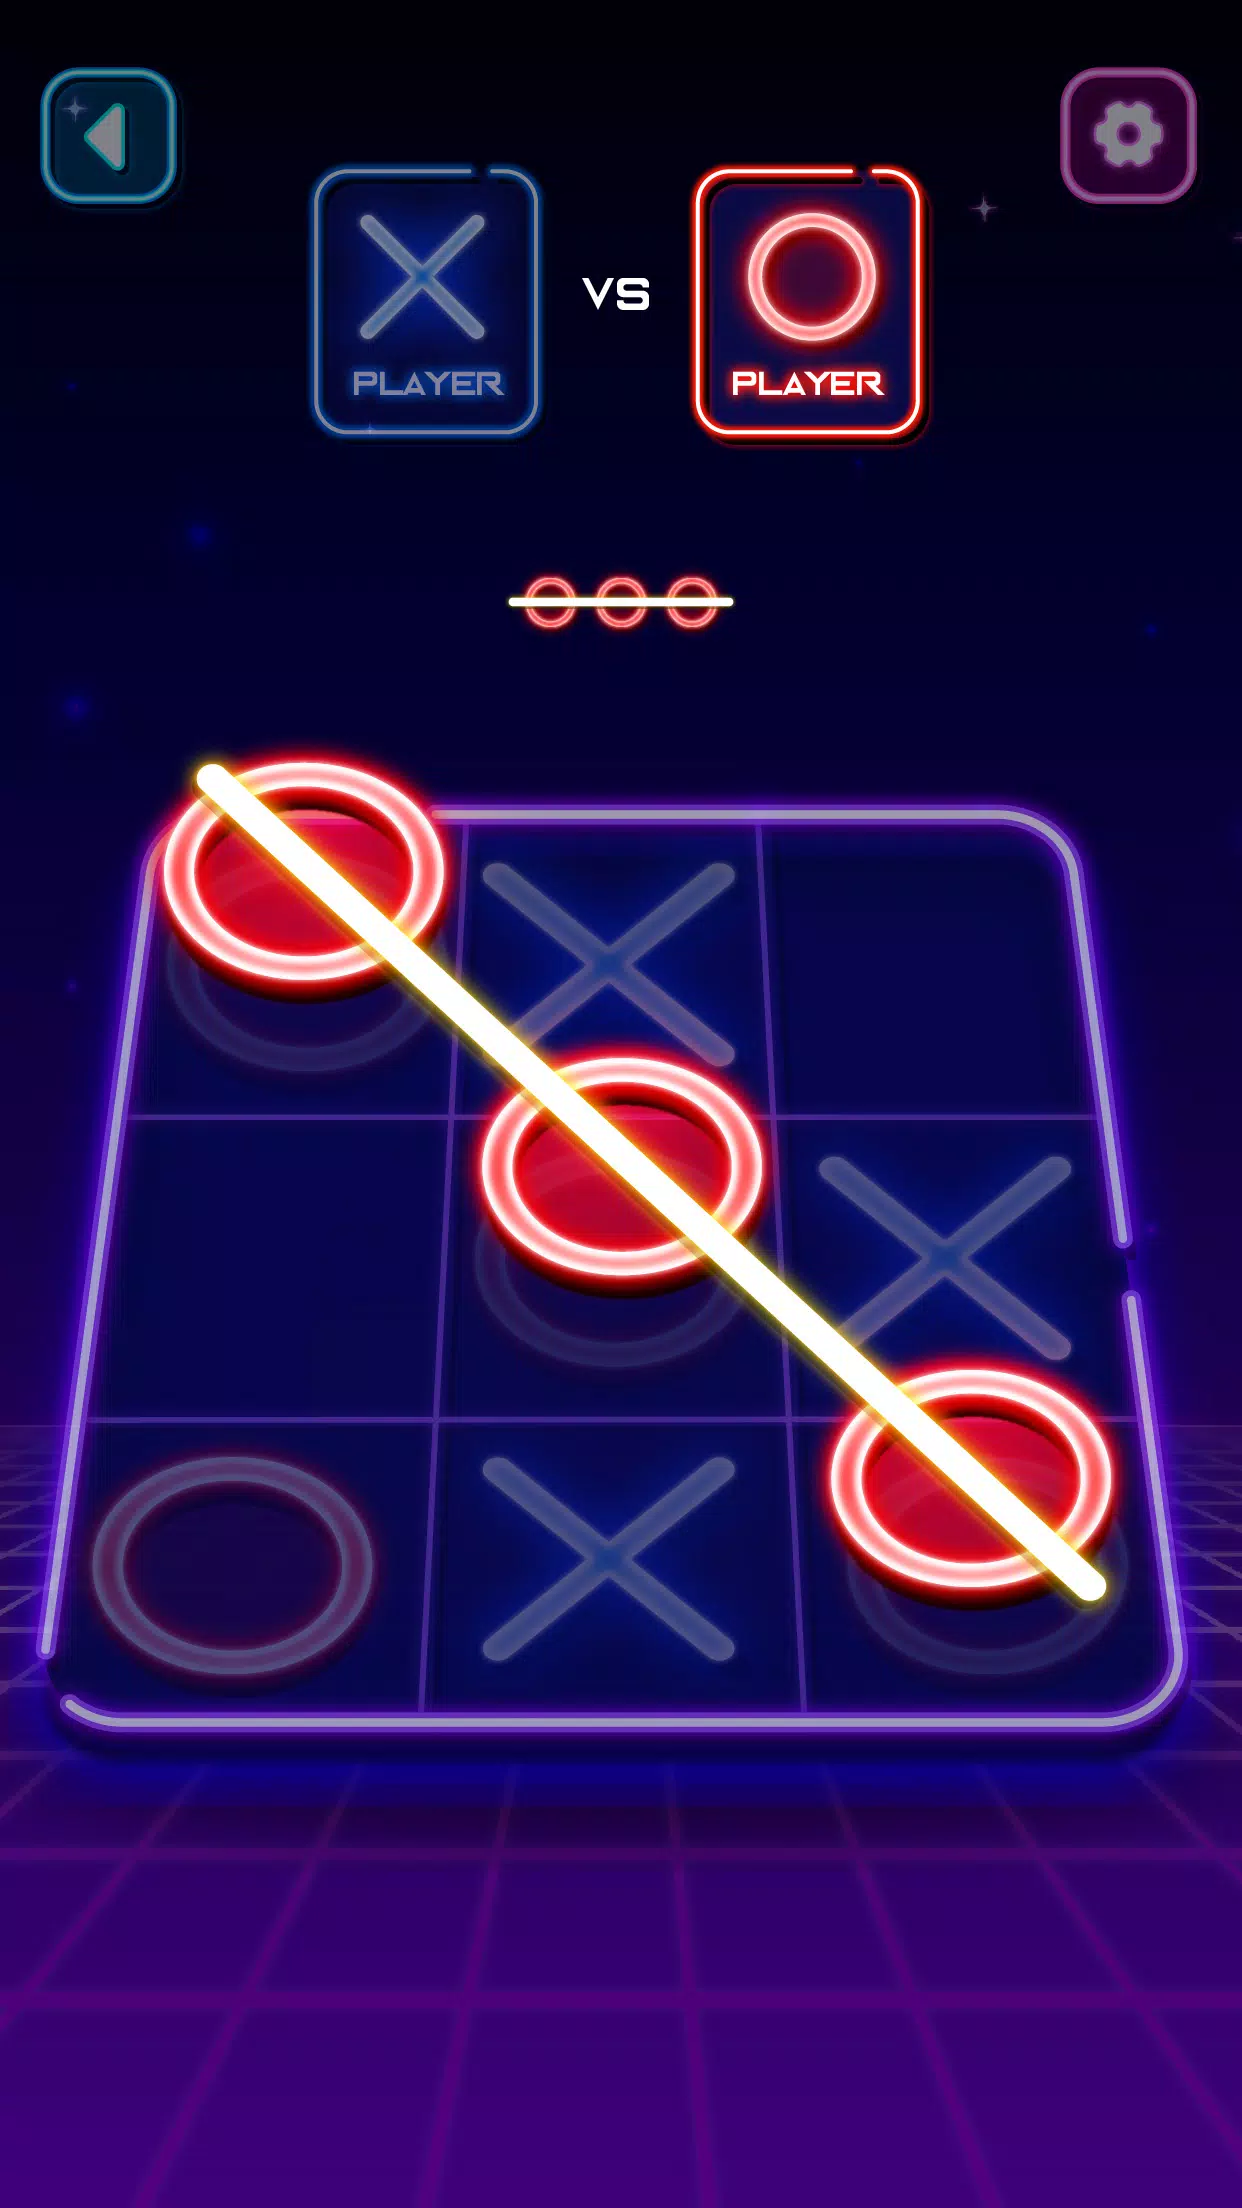 About: Tic Tac Toe Glow Puzzle Game (iOS App Store version